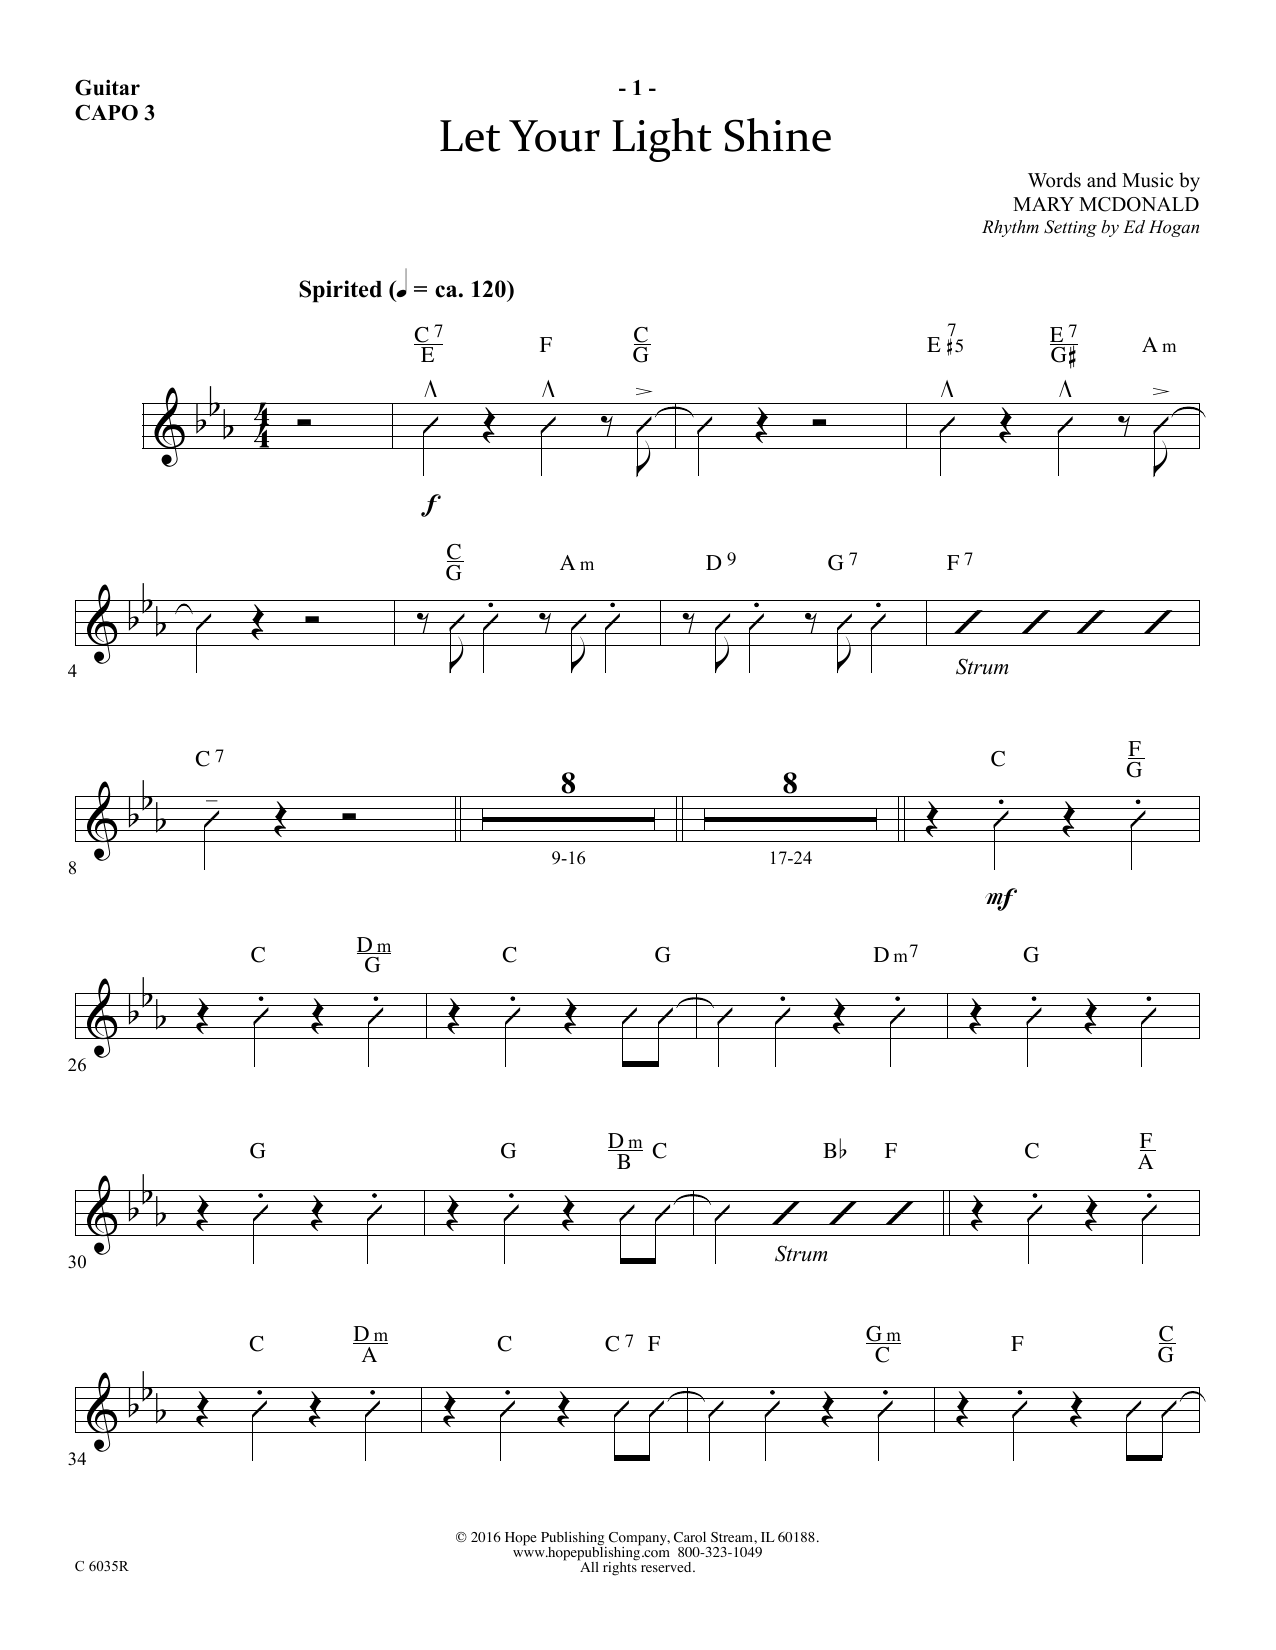 Download Mary McDonald Let Your Light Shine - Guitar Sheet Music